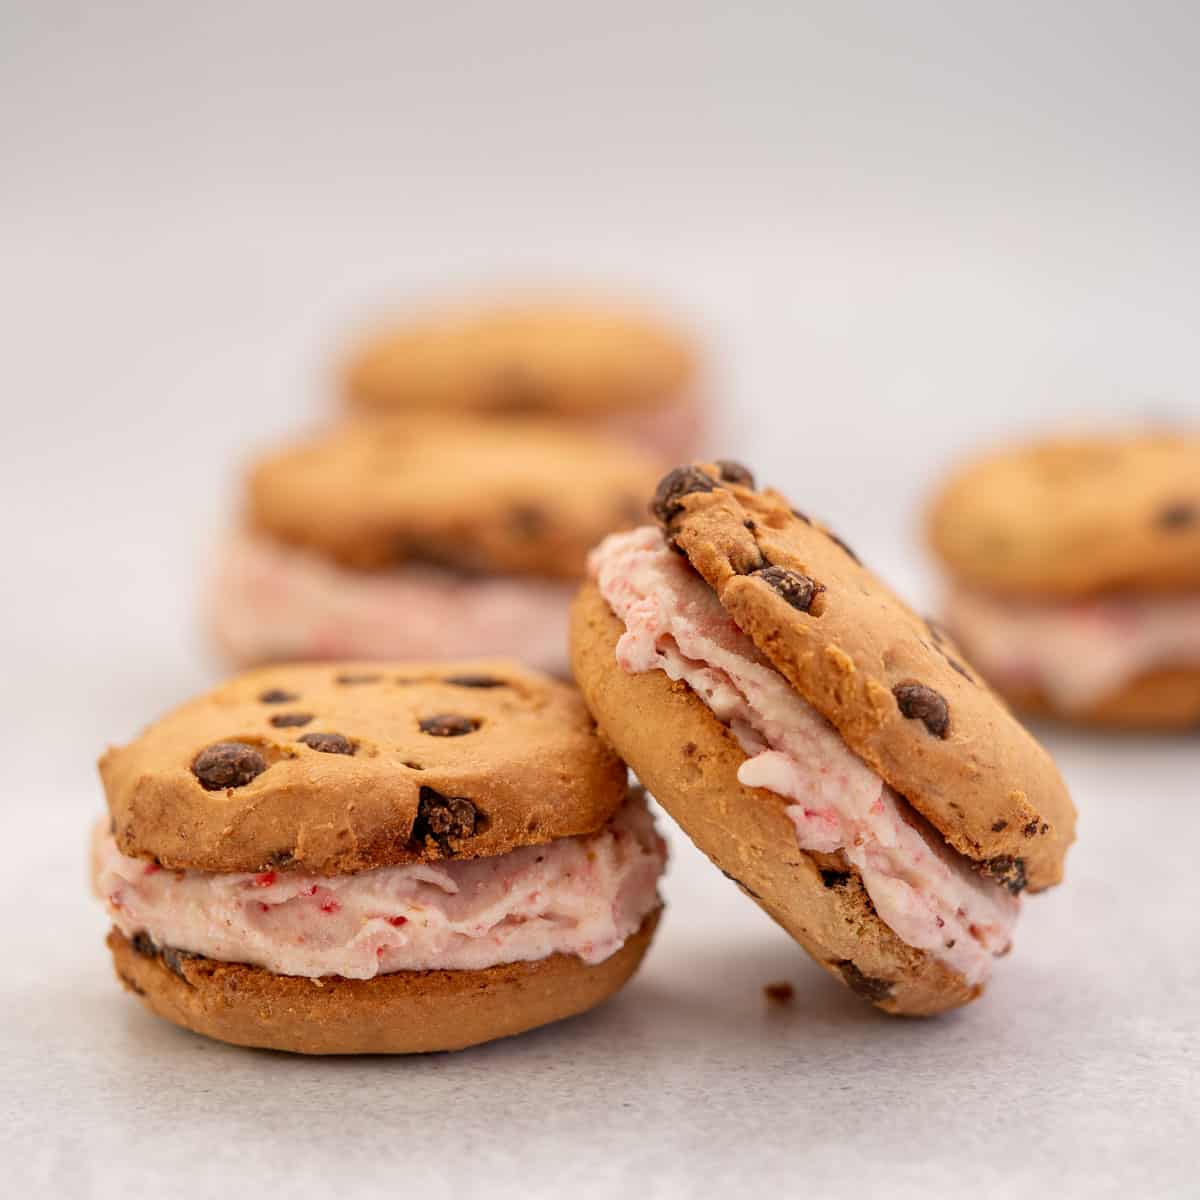 Chocolate Chip Cookie and Strawberry Ice Cream Sandwiches laid out on a bench top.